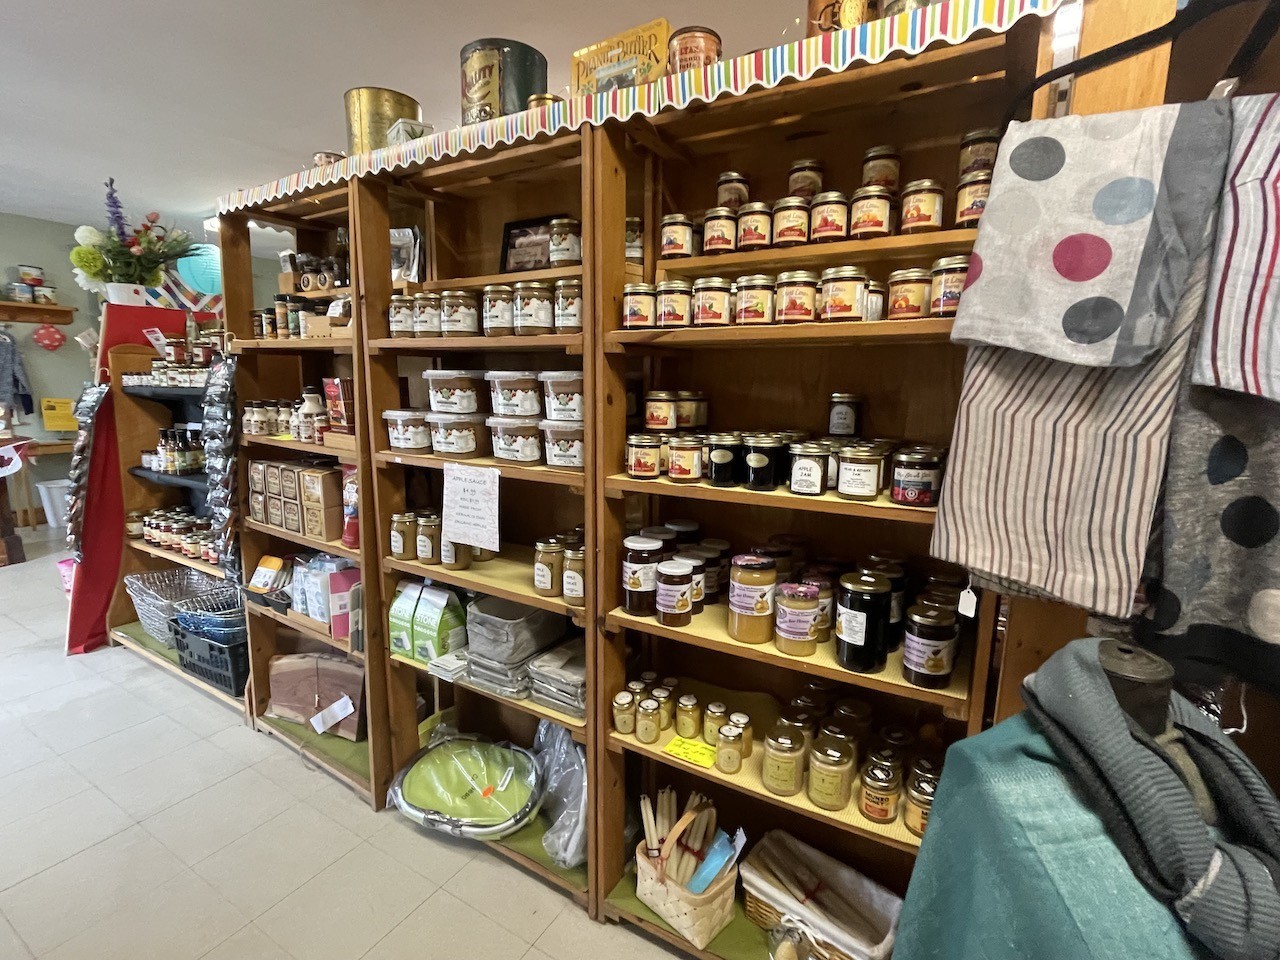 Local Artisan Products at Kernal Peanuts - From soaps to jams and other yummy treats, Kernal Peanuts also offers products from local artisans and farmers.